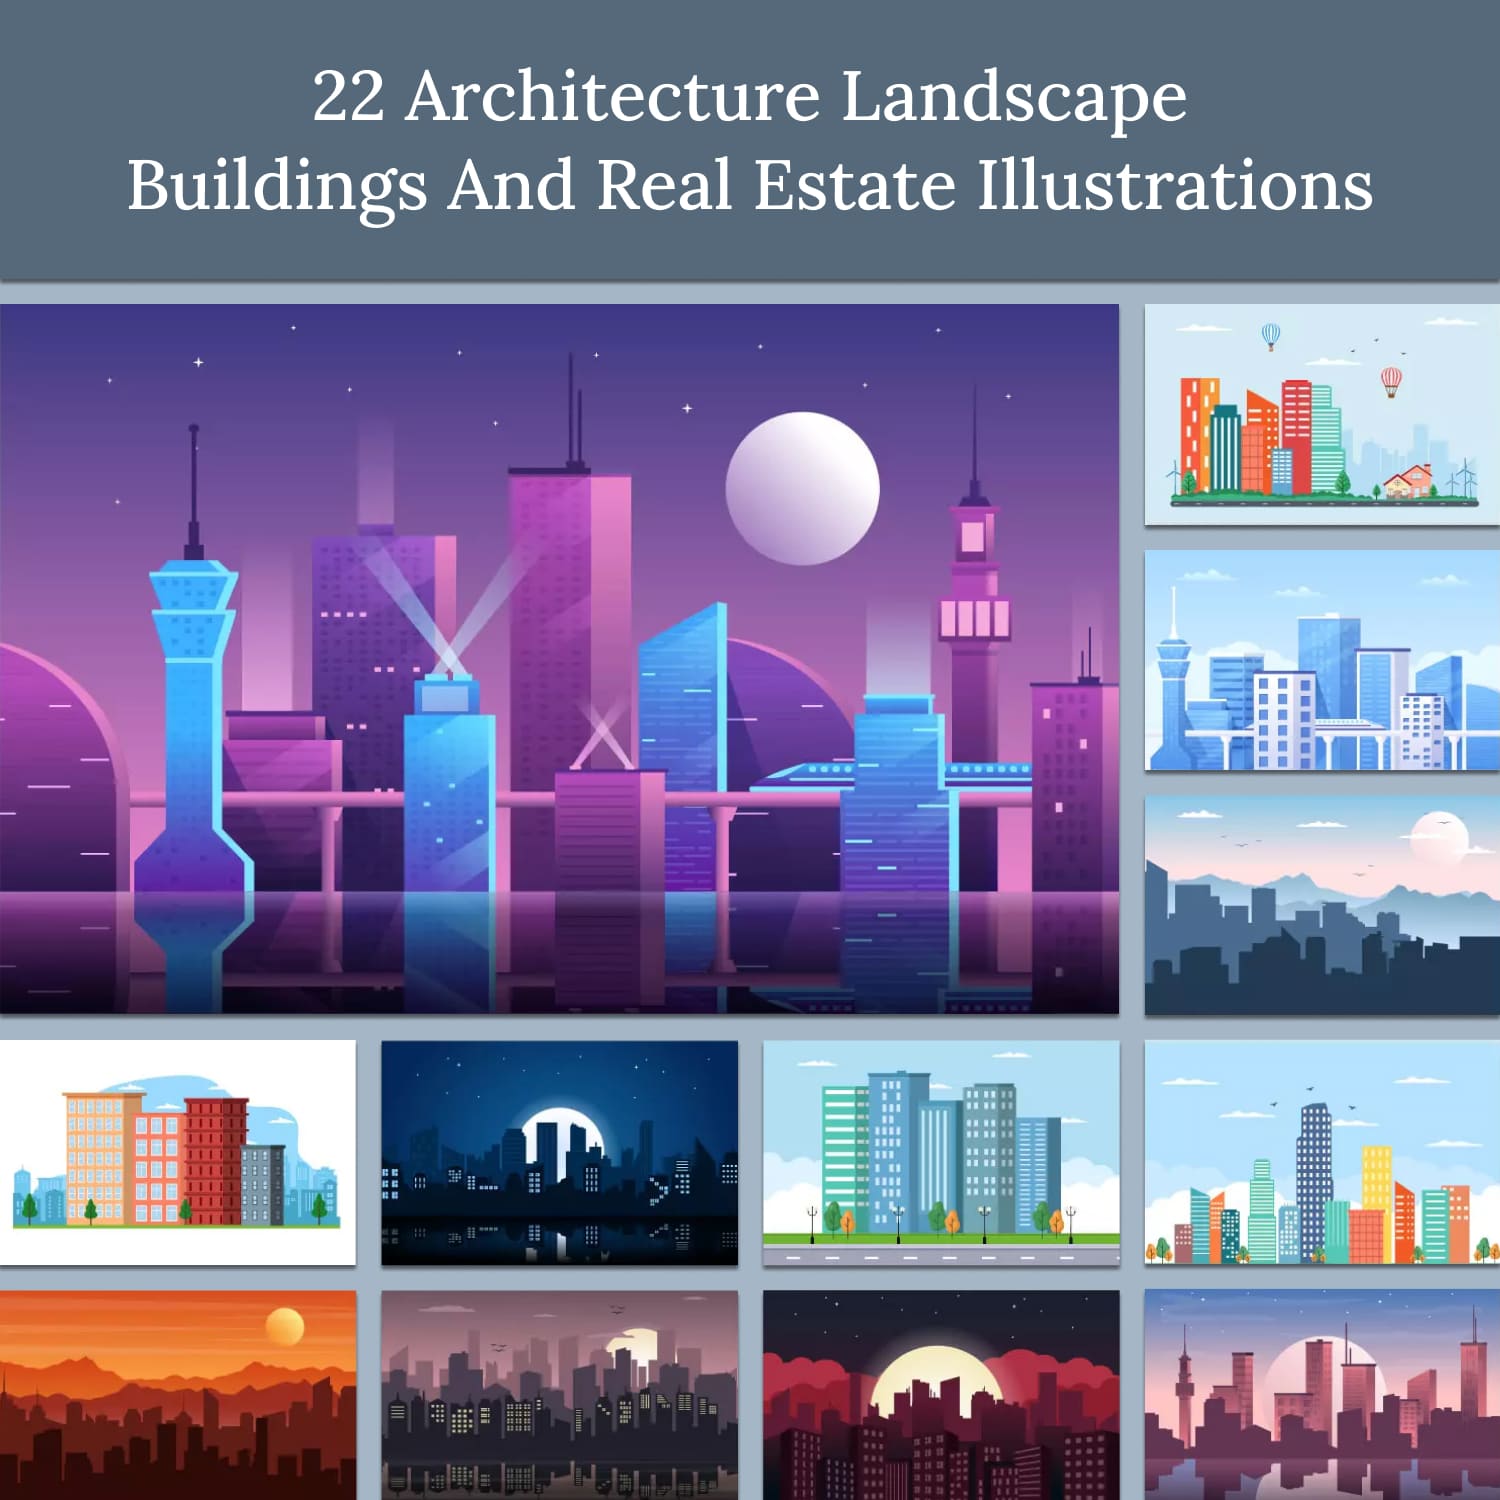 22 Architecture Landscape Buildings and Real Estate Illustrations.